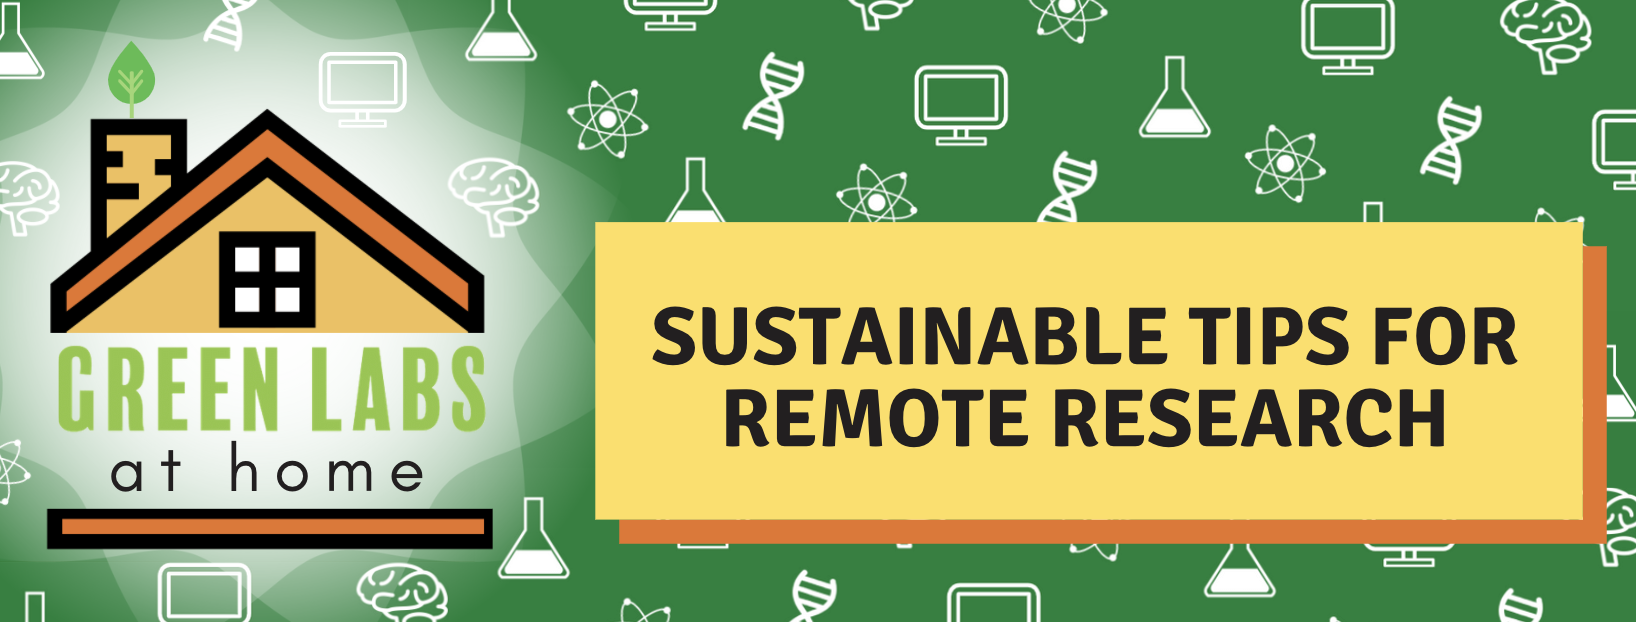 sustainable tips for remote research